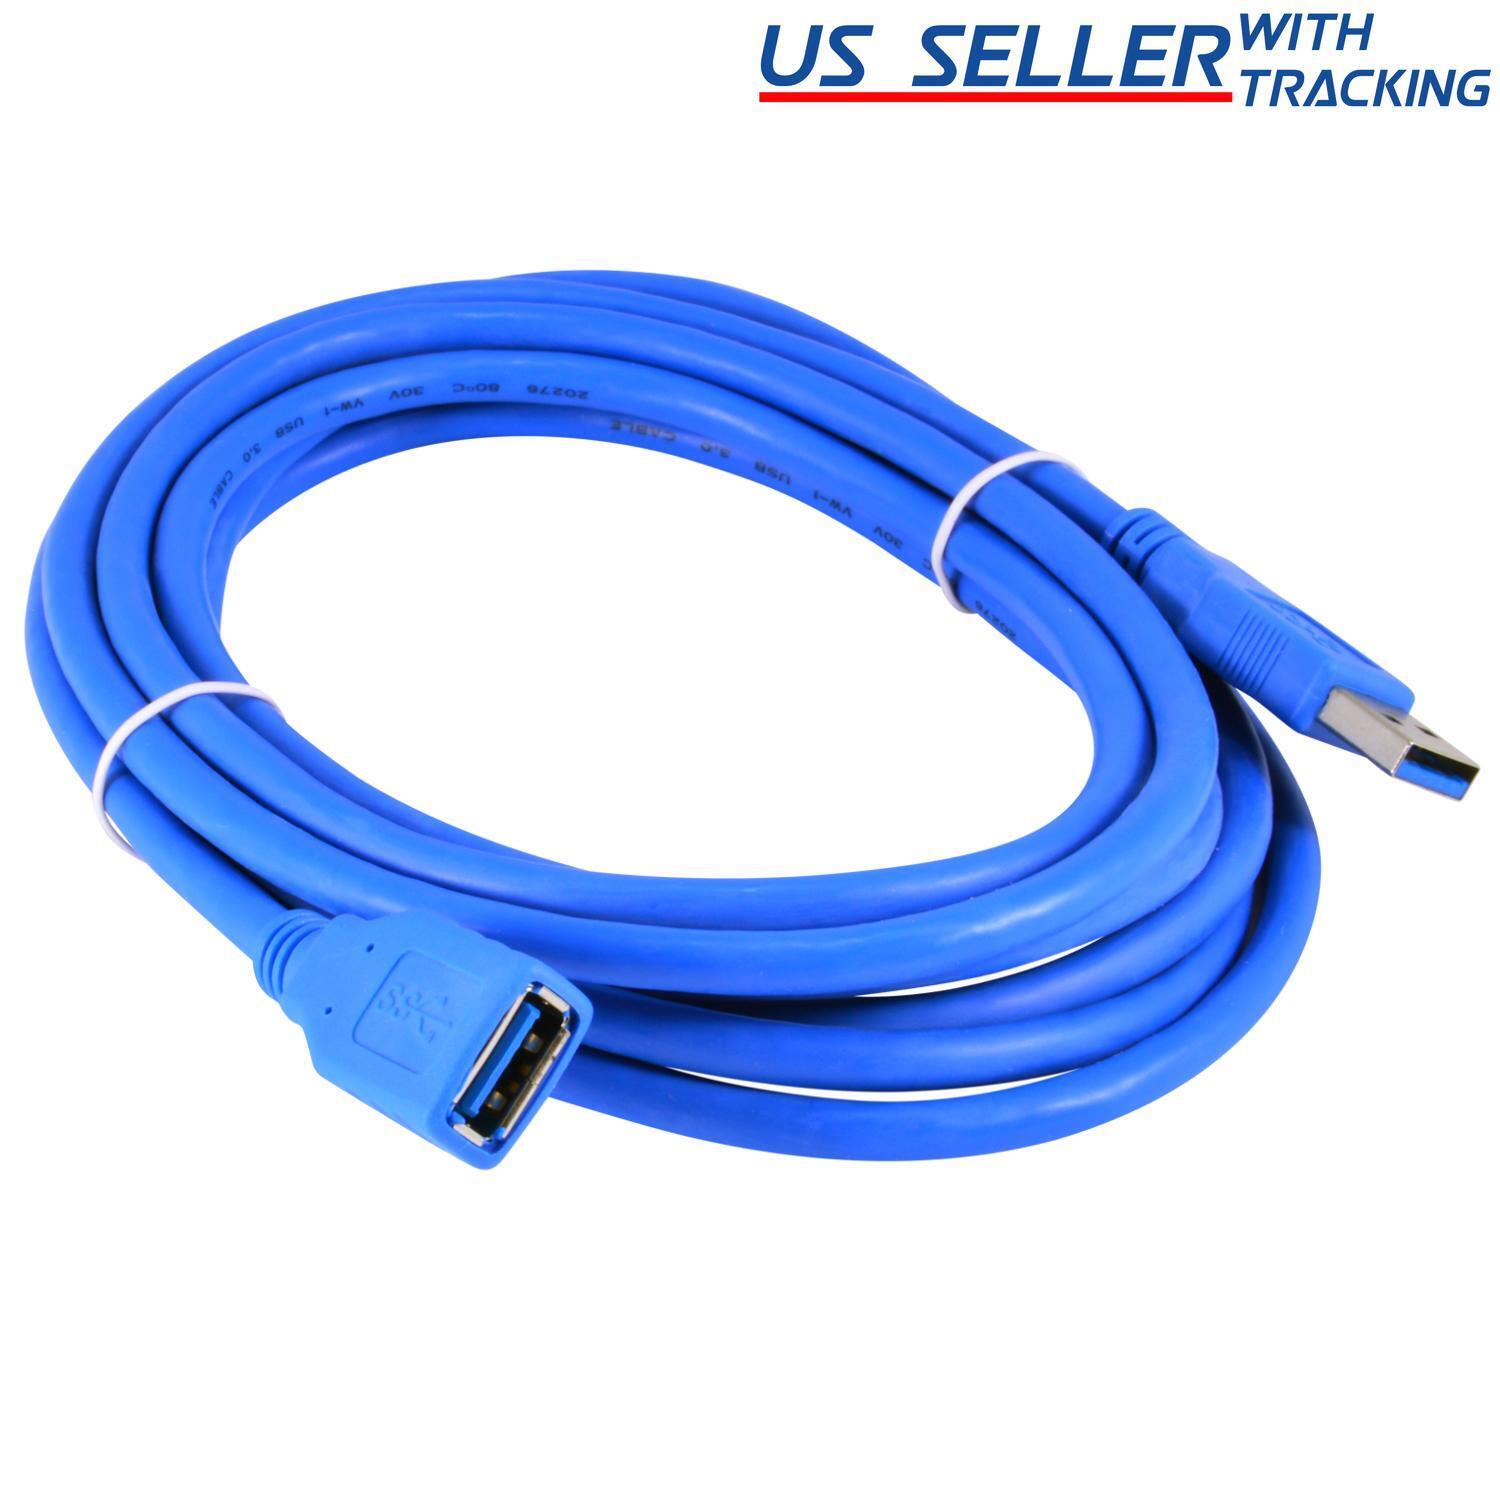 10Ft/3M USB 3.0 Extension Cable, A-Male to A-Female Data Cord, 5Gbps, Blue